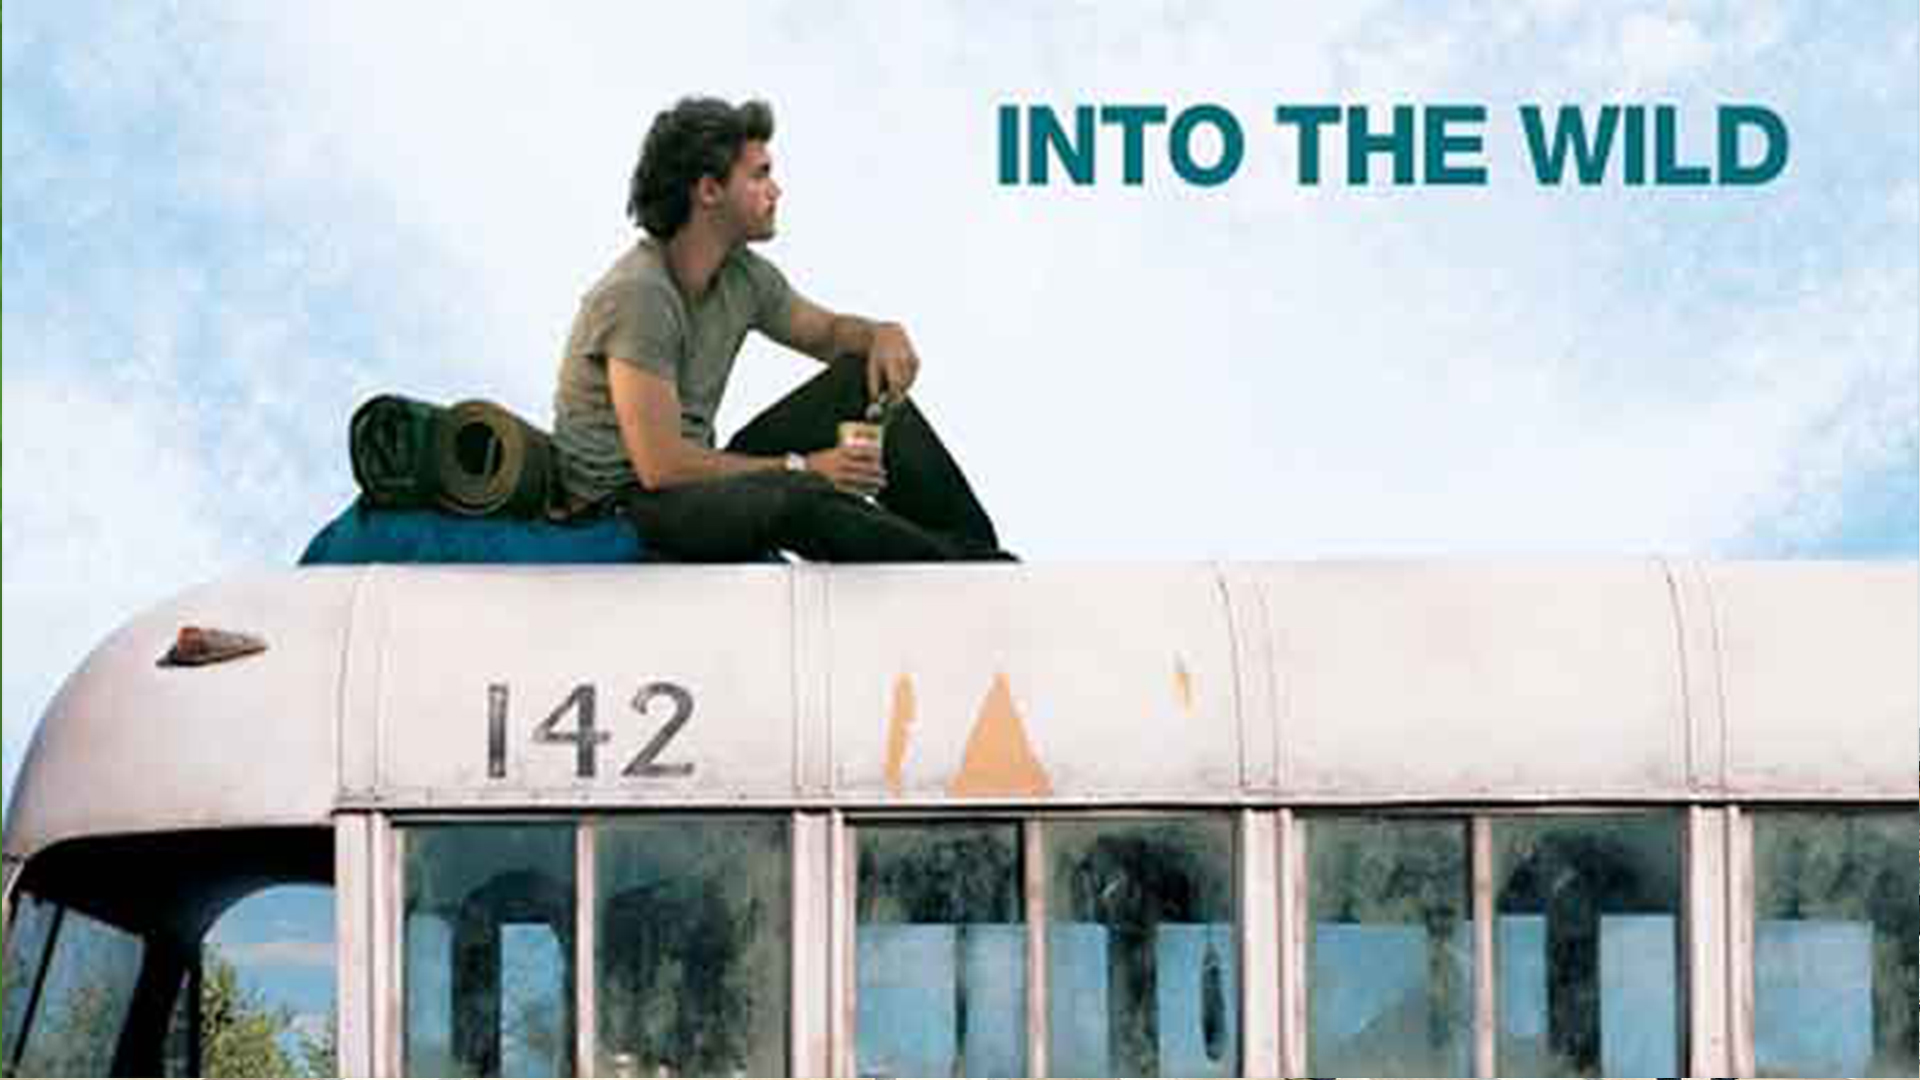 ‘Into the Wild’ movie’s famous Bus removed from Alaska